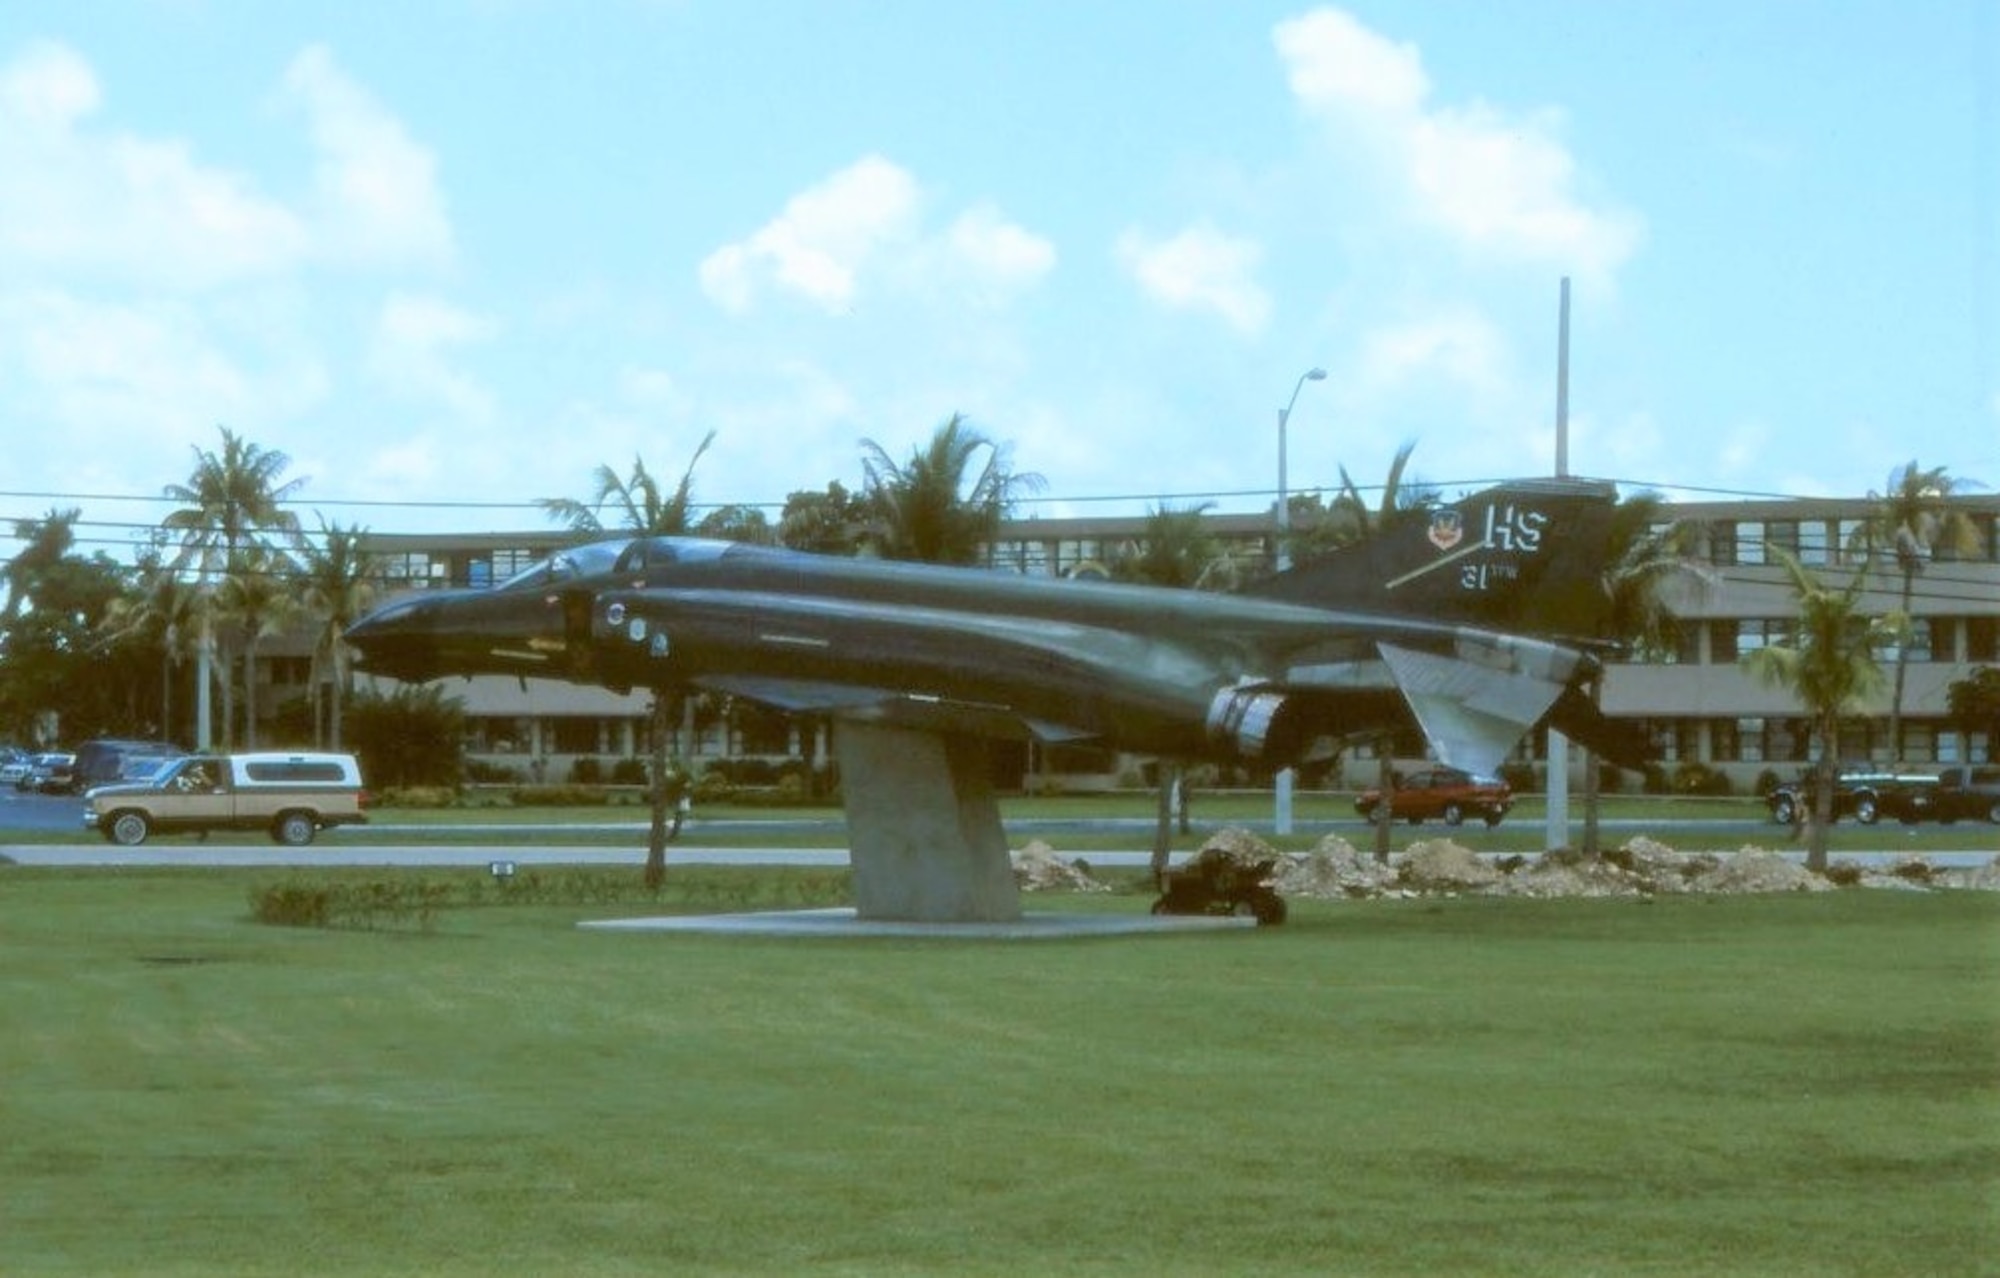 F-4D fighter aircraft #66-0267 at Homestead Air Force Base, Fla., circa 1989. The aircraft was flown by Capt. John A. Madden, Jr. and Capt. Charles B. DeBellevue, with the 8th Tactical Fighter Wing at Udorn Air Base, Thailand deployed for the Vietnam War. (Courtesy photo by Michael E. Fader)